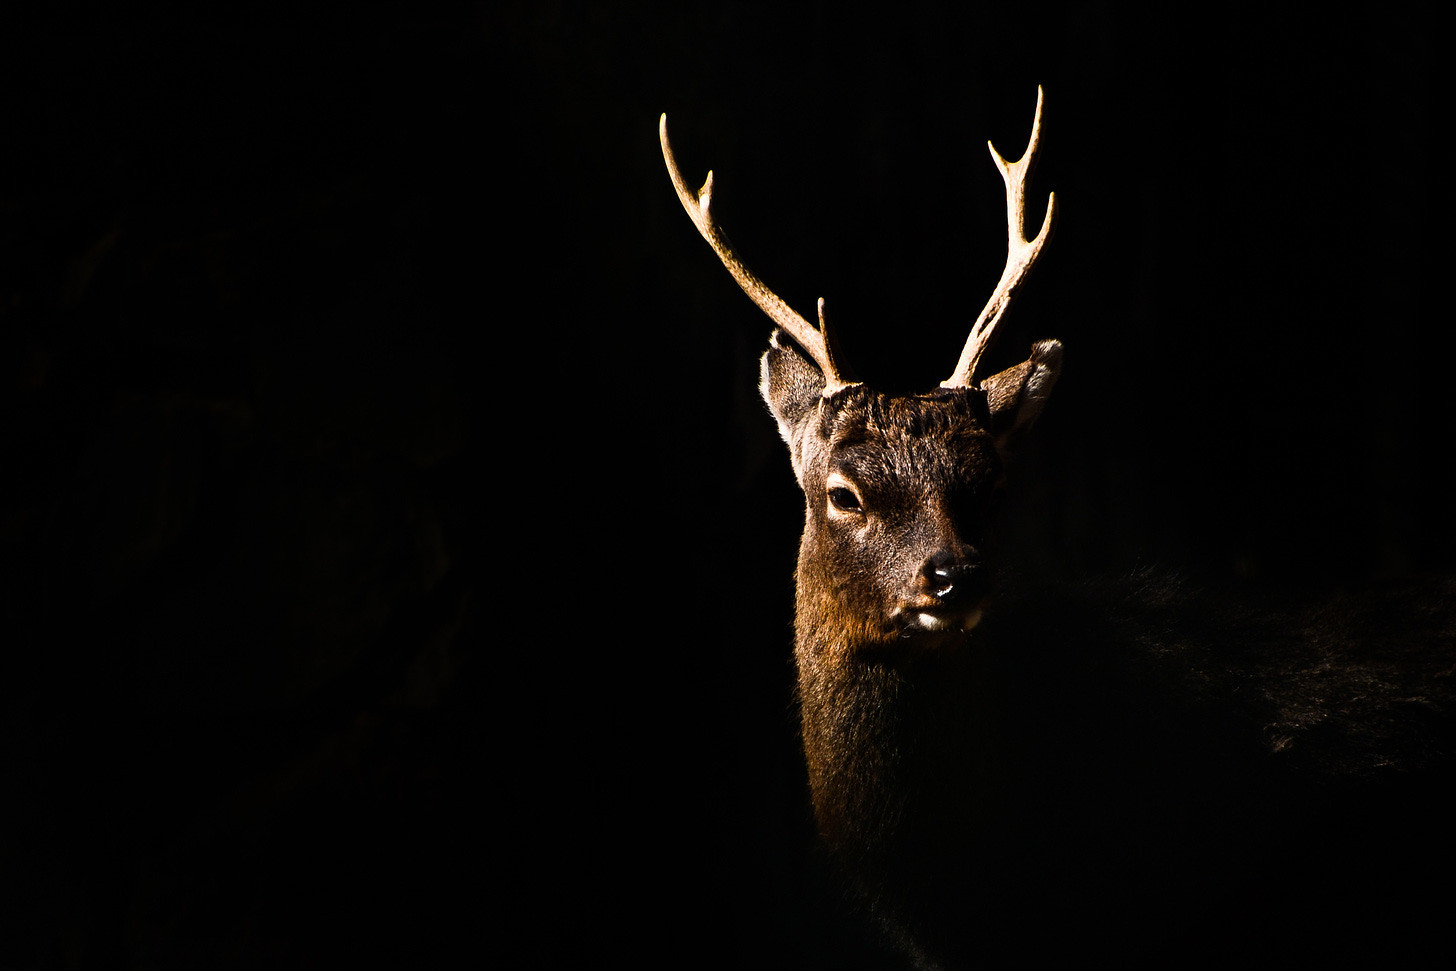 A six point buck deer in the darkness